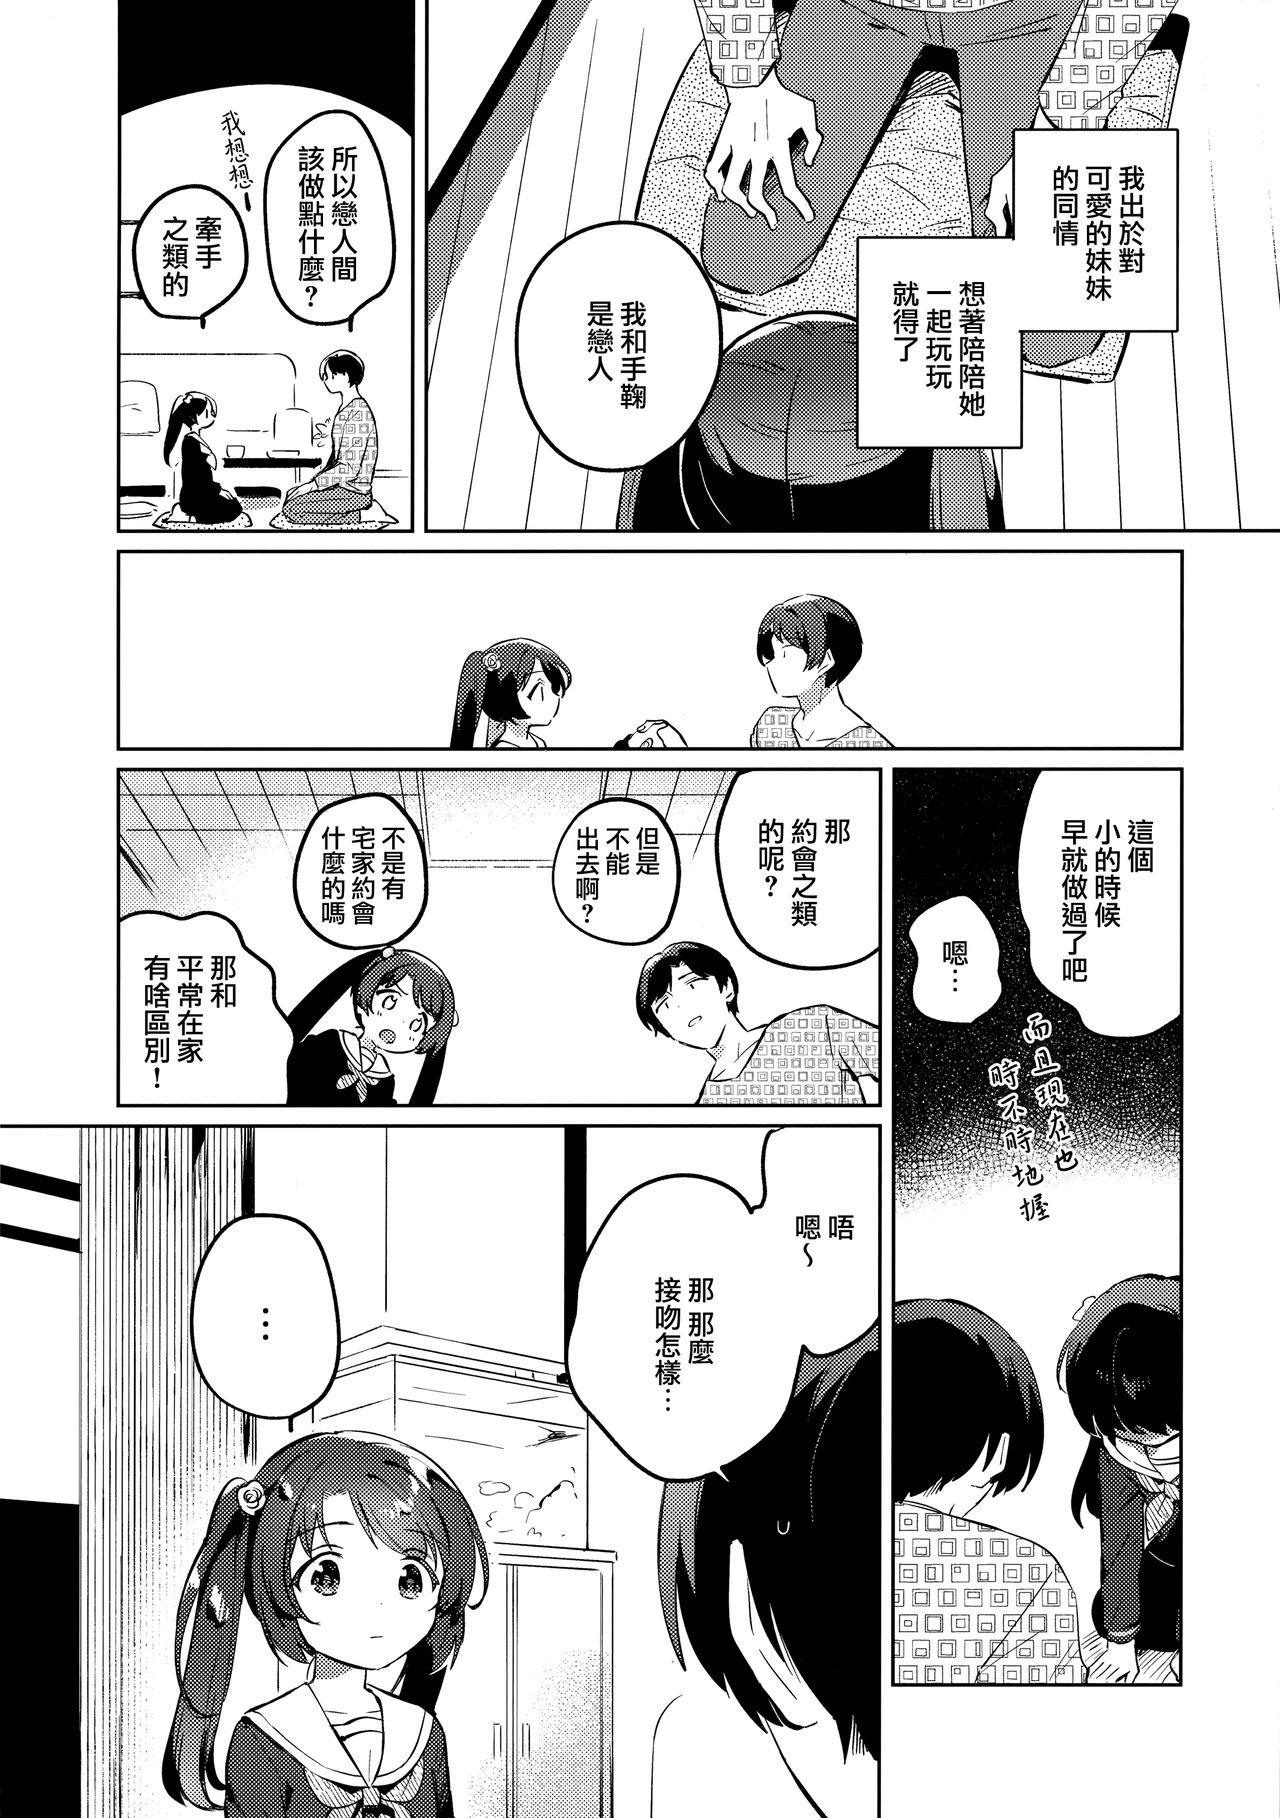 Nudity Imouto to Lockdown - Original Gay Cut - Page 8